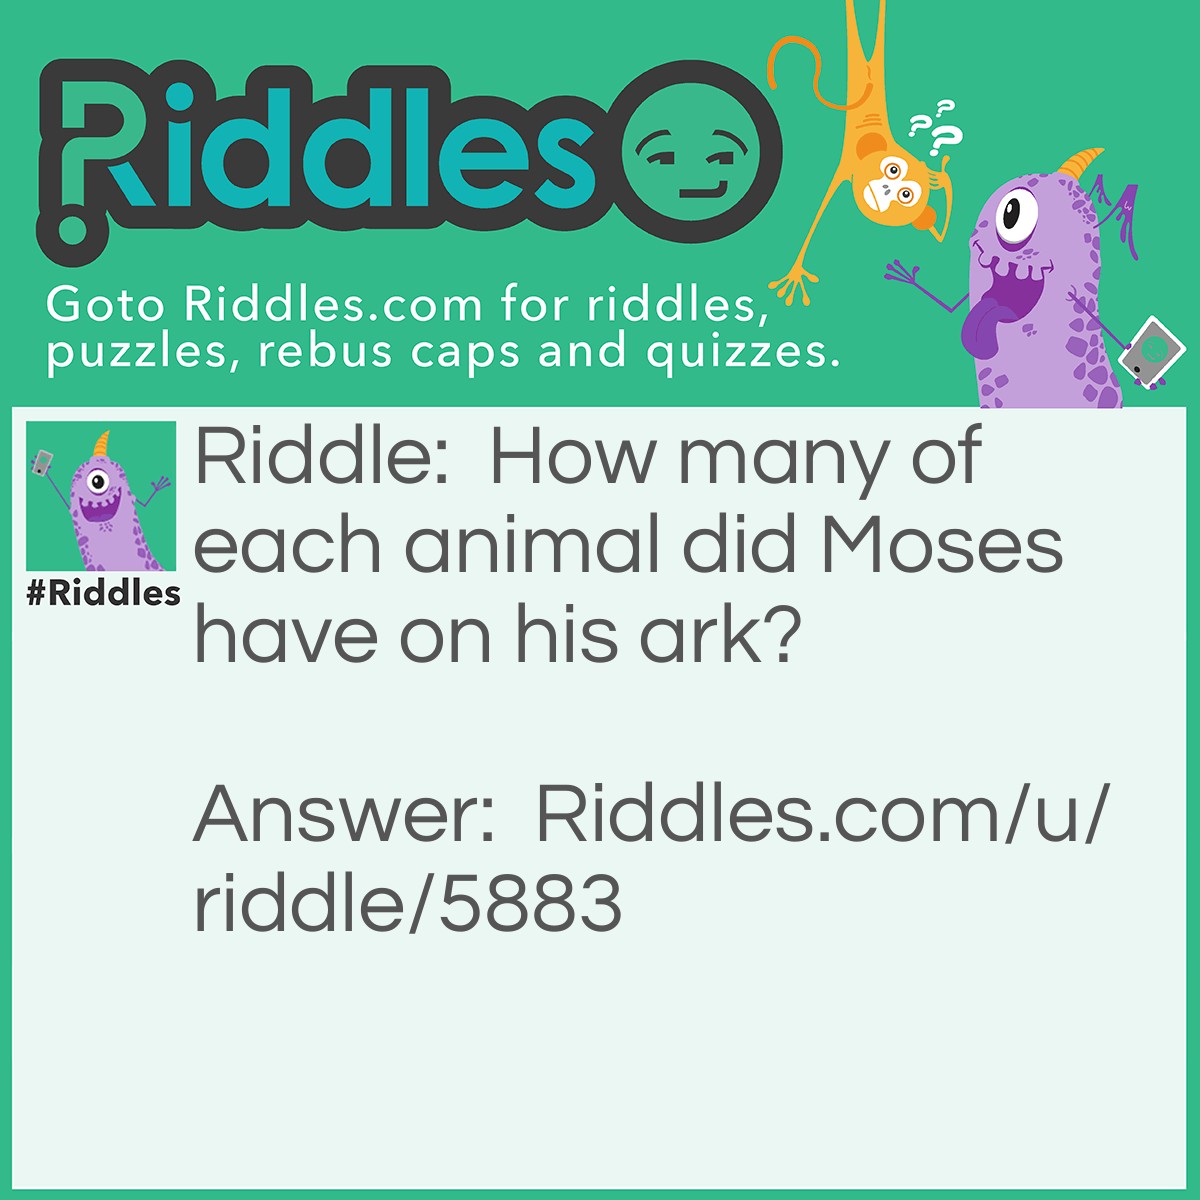 Riddle: How many of each animal did Moses have on his ark? Answer: None, Moses didn't have an ark!